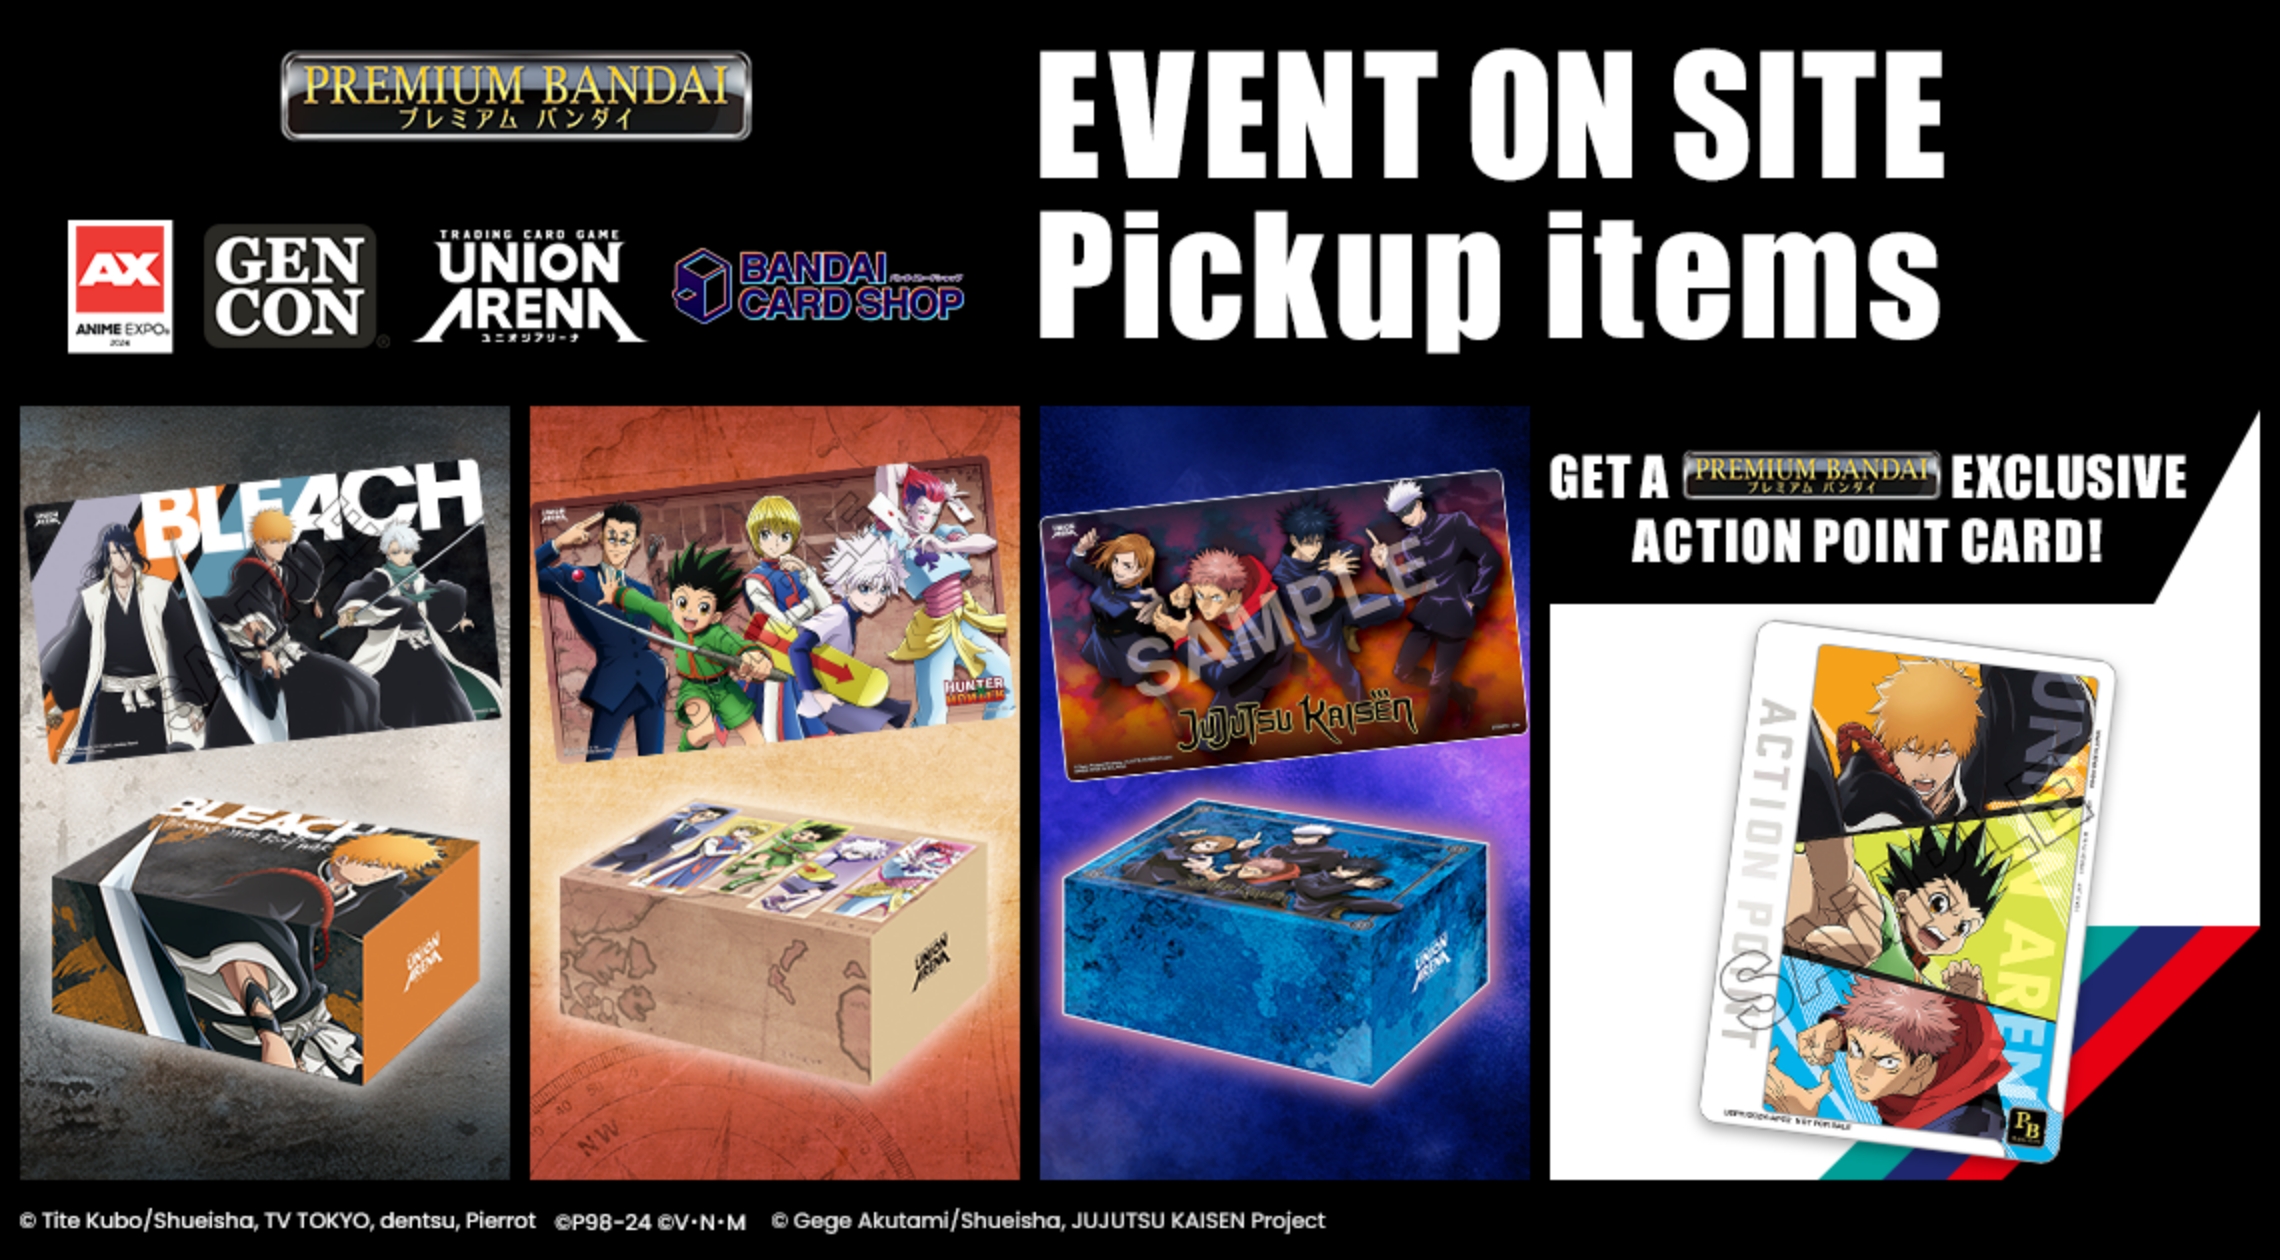 EVENT ON SITE Pickup items  GET A PREMIUM BANDAI EXCLUSIVE ACTION POINT CARD!